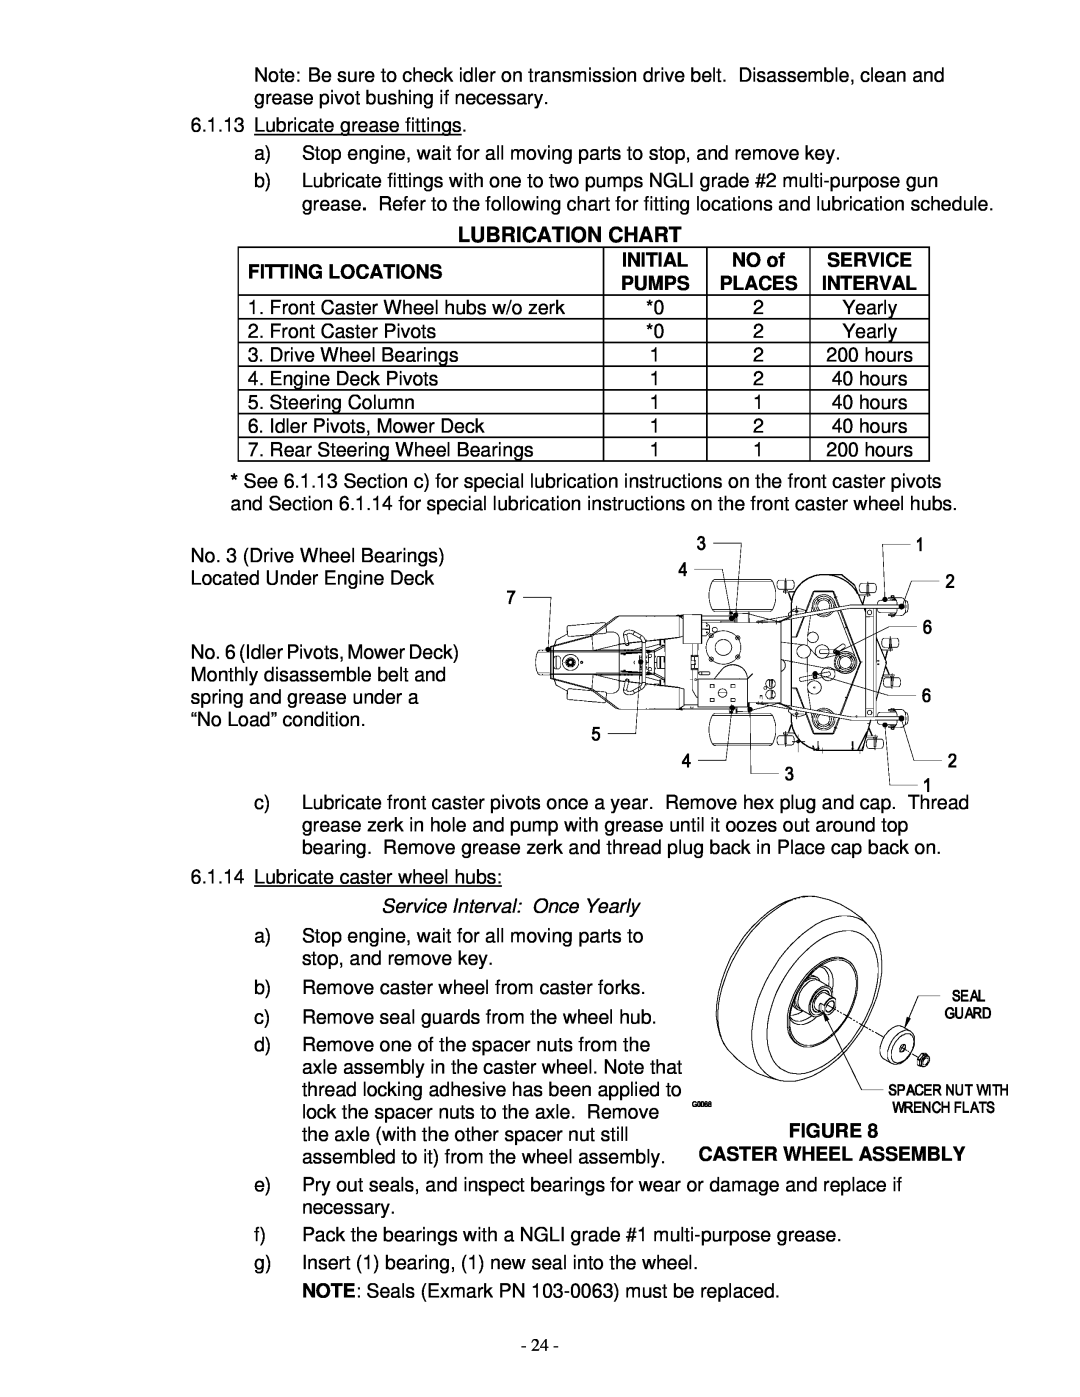 Exmark FMD 604 manual Lubrication Chart, Fitting Locations, Initial, NO of, Service, Pumps, Places, Caster Wheel Assembly 